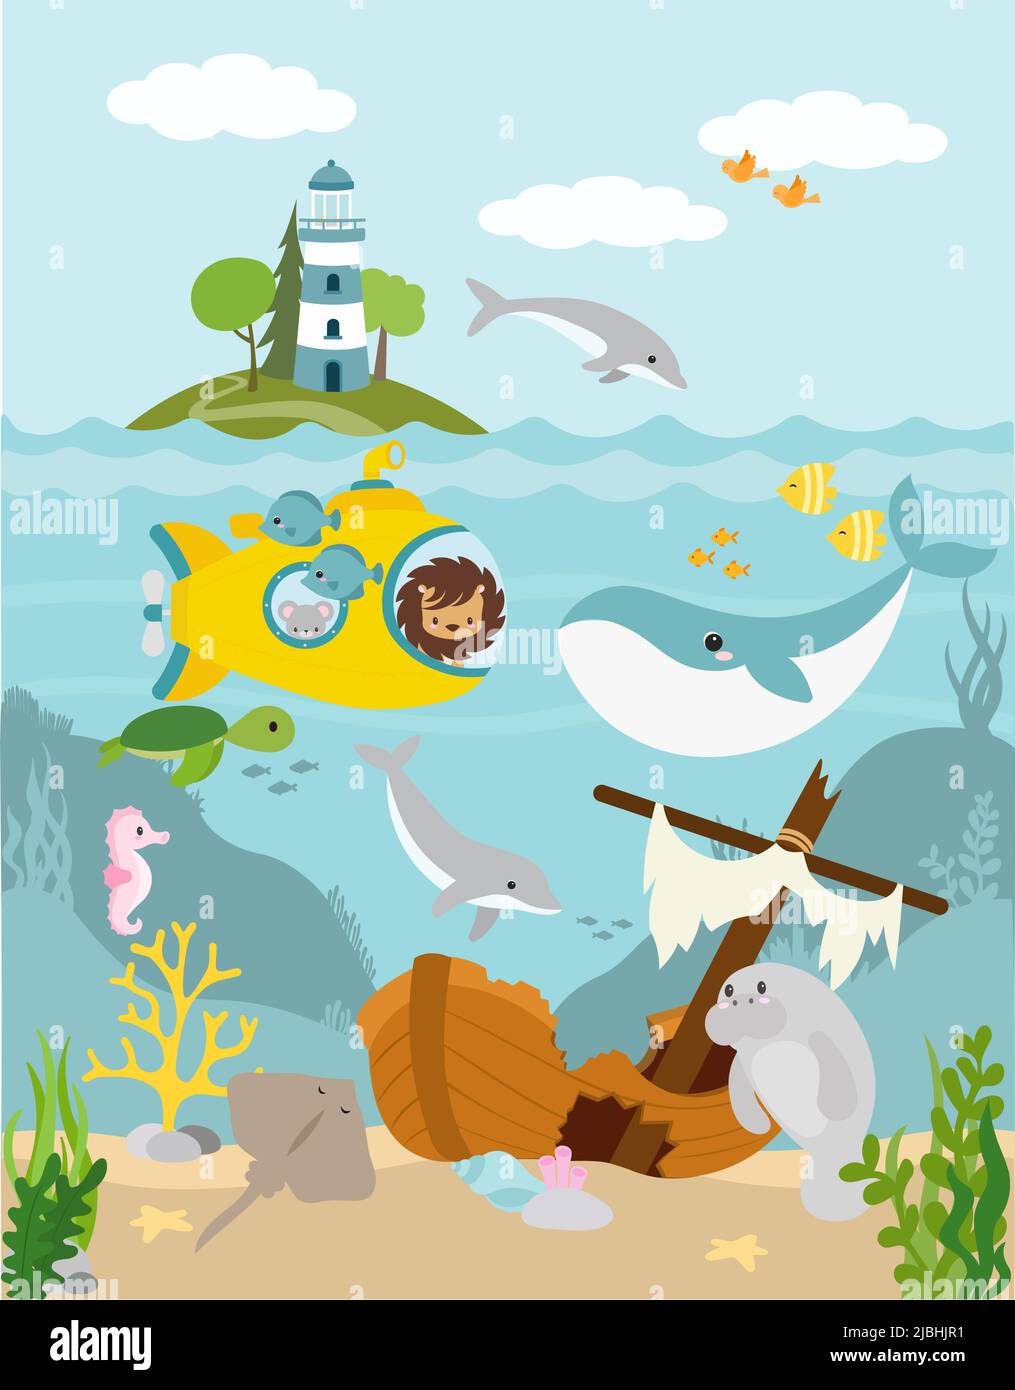 Underwater illustration with yellow submarine and cute sea animals Stock Vector